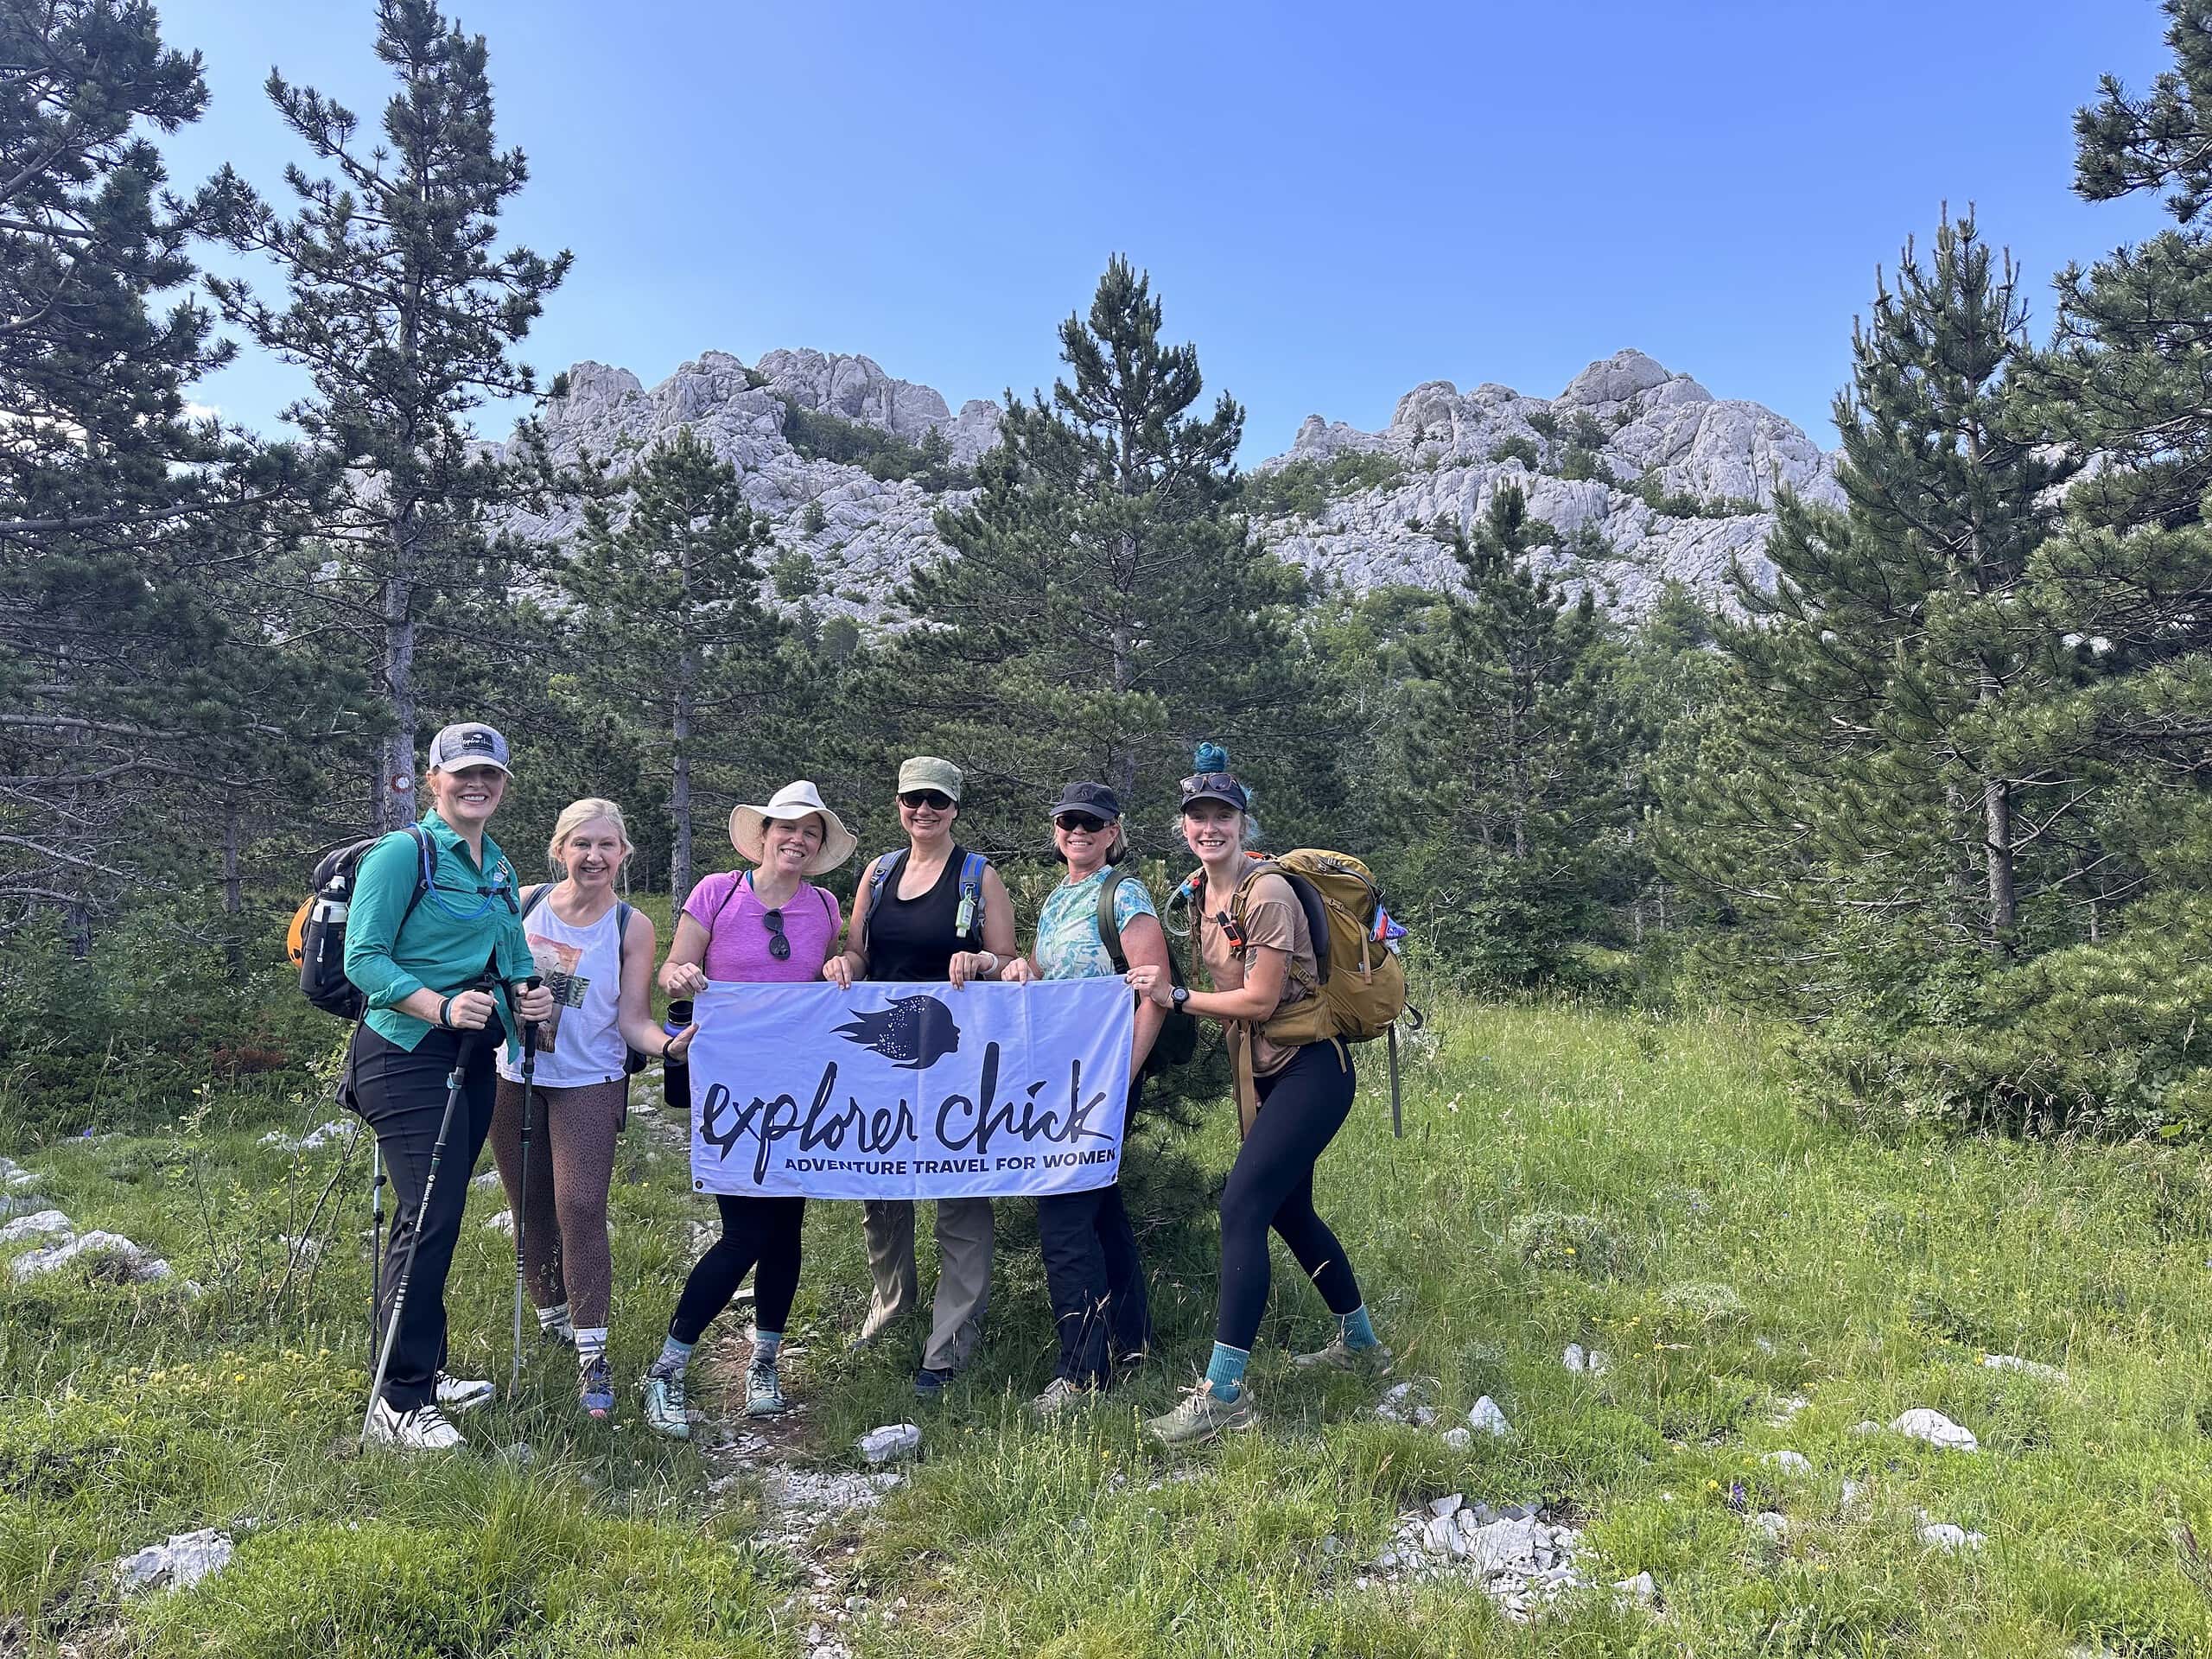 A group of women hiking holding a sign that says Explorer Chick